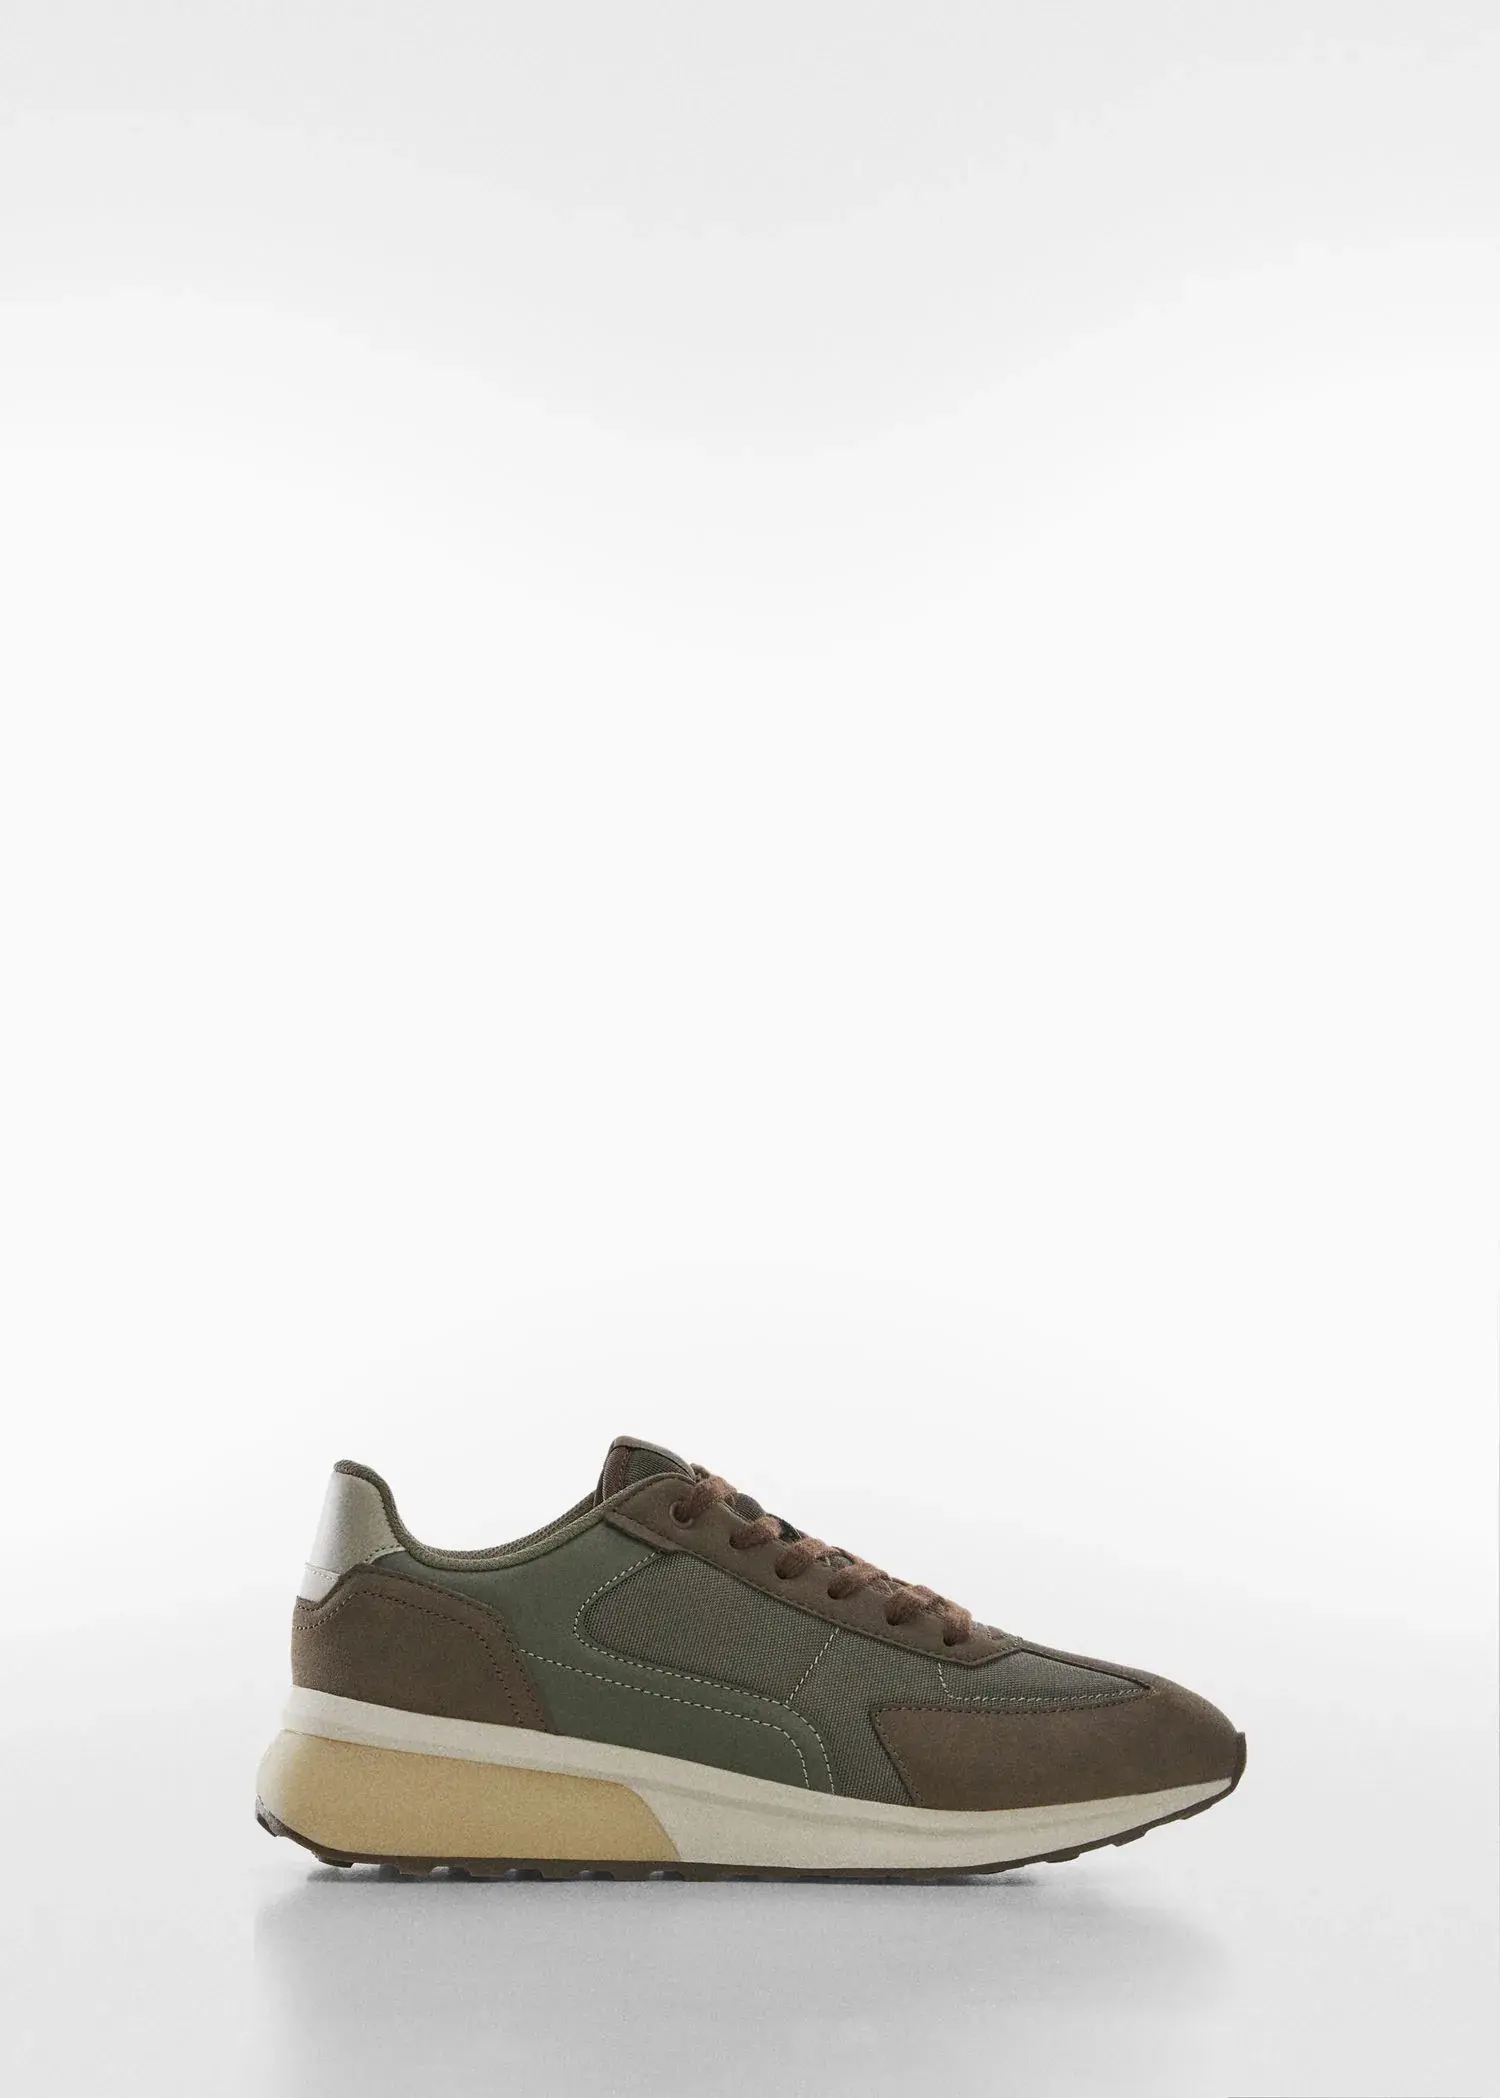 Mango Leather mixed sneakers. a pair of shoes that are sitting on the ground. 